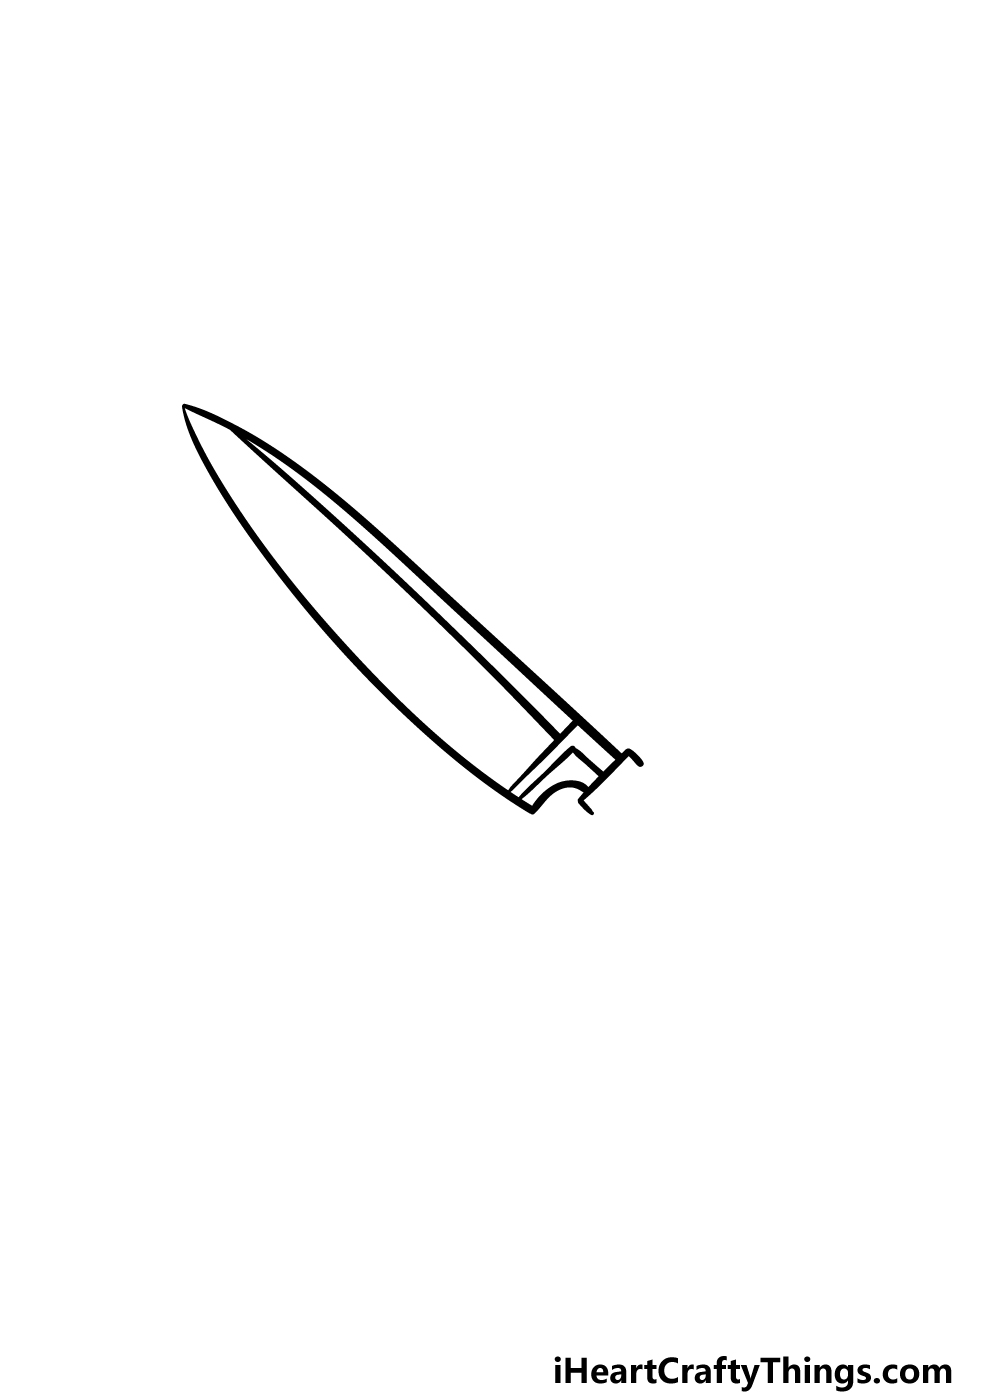 drawing a knife step 2